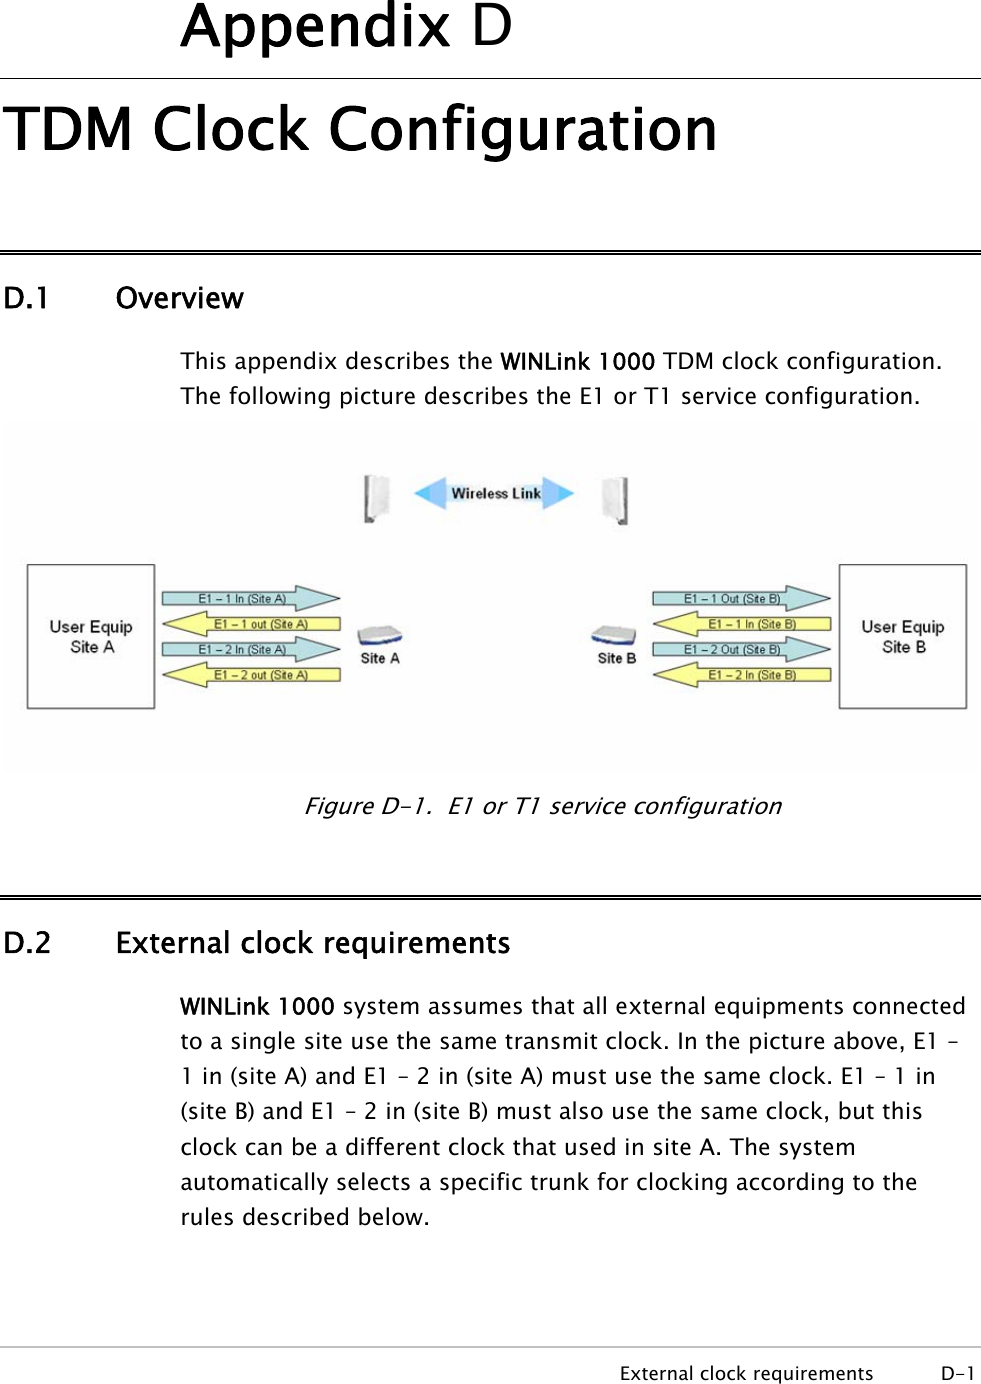     External clock requirements  D-1 Appendix D TDM Clock Configuration D.1 Overview This appendix describes the WINLink 1000 TDM clock configuration. The following picture describes the E1 or T1 service configuration.  Figure D-1.  E1 or T1 service configuration D.2 External clock requirements WINLink 1000 system assumes that all external equipments connected to a single site use the same transmit clock. In the picture above, E1 – 1 in (site A) and E1 – 2 in (site A) must use the same clock. E1 – 1 in (site B) and E1 – 2 in (site B) must also use the same clock, but this clock can be a different clock that used in site A. The system automatically selects a specific trunk for clocking according to the rules described below. 